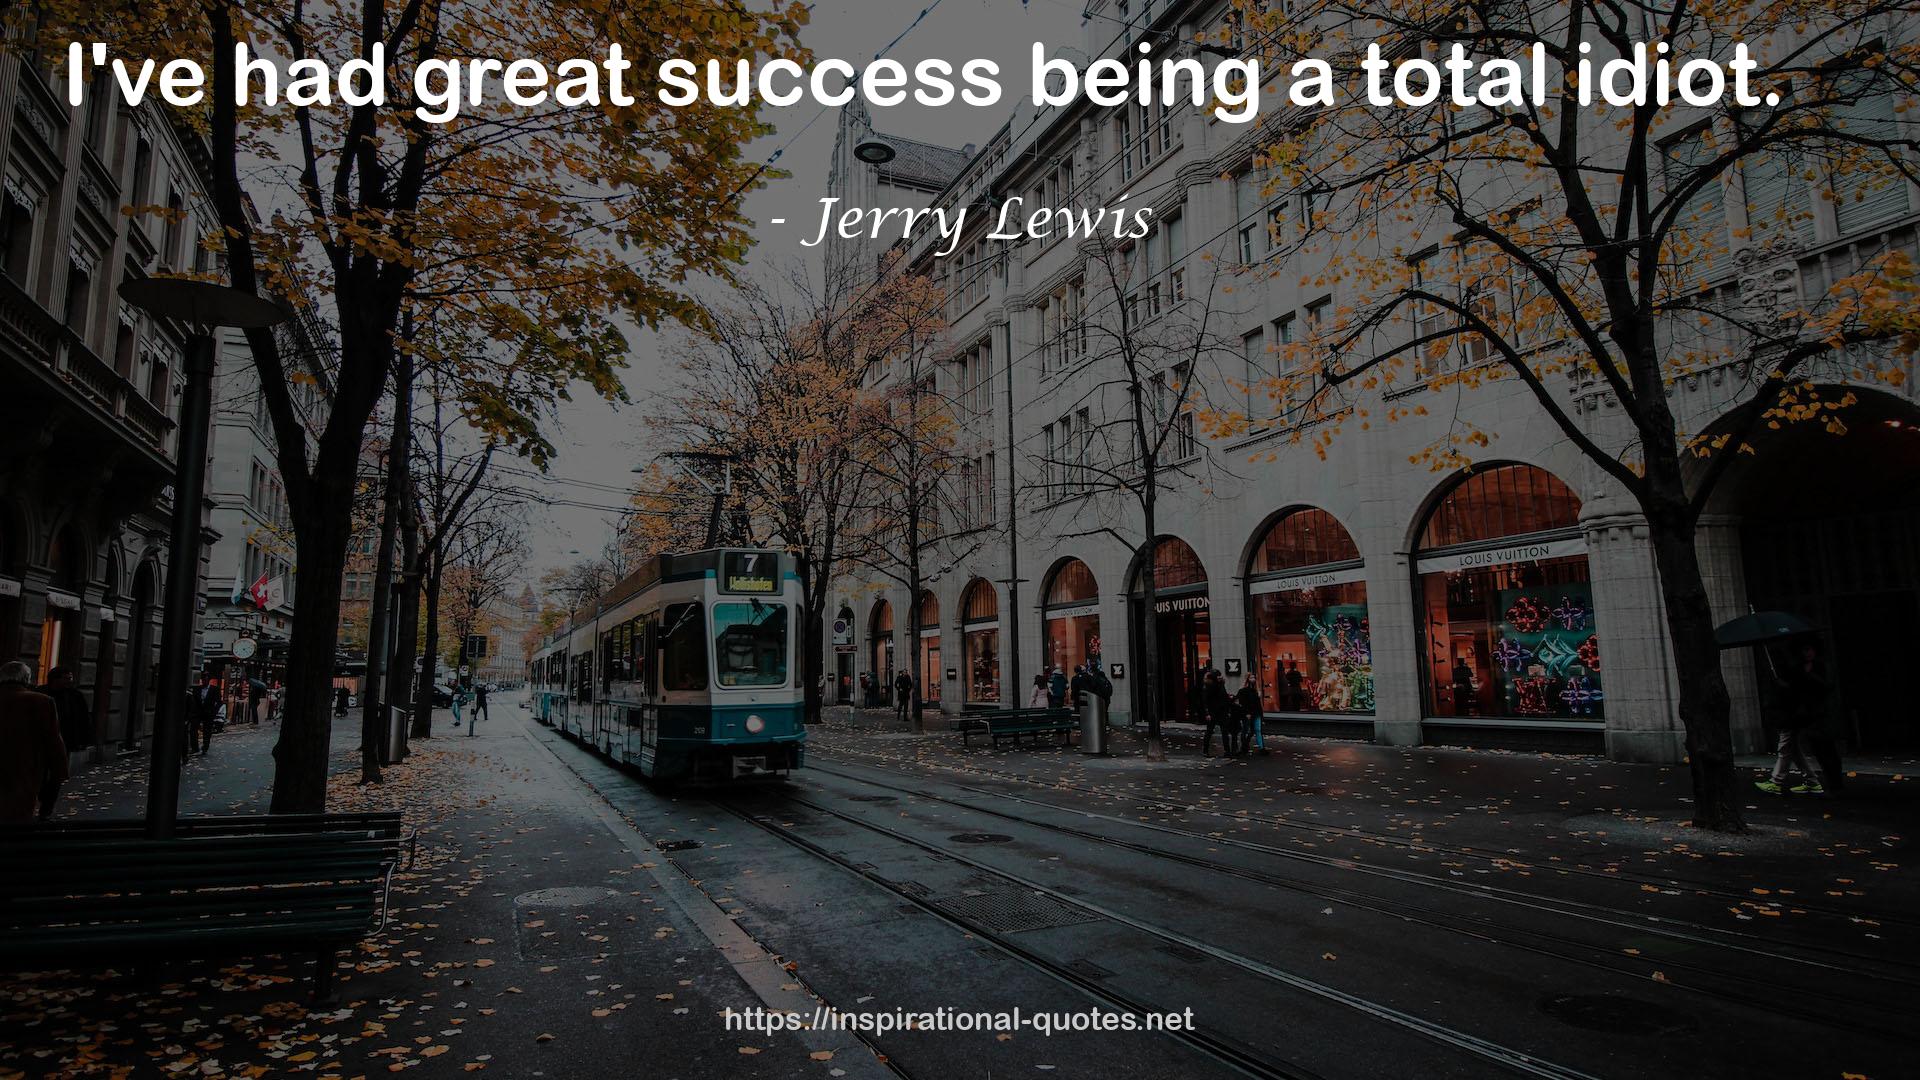 Jerry Lewis QUOTES